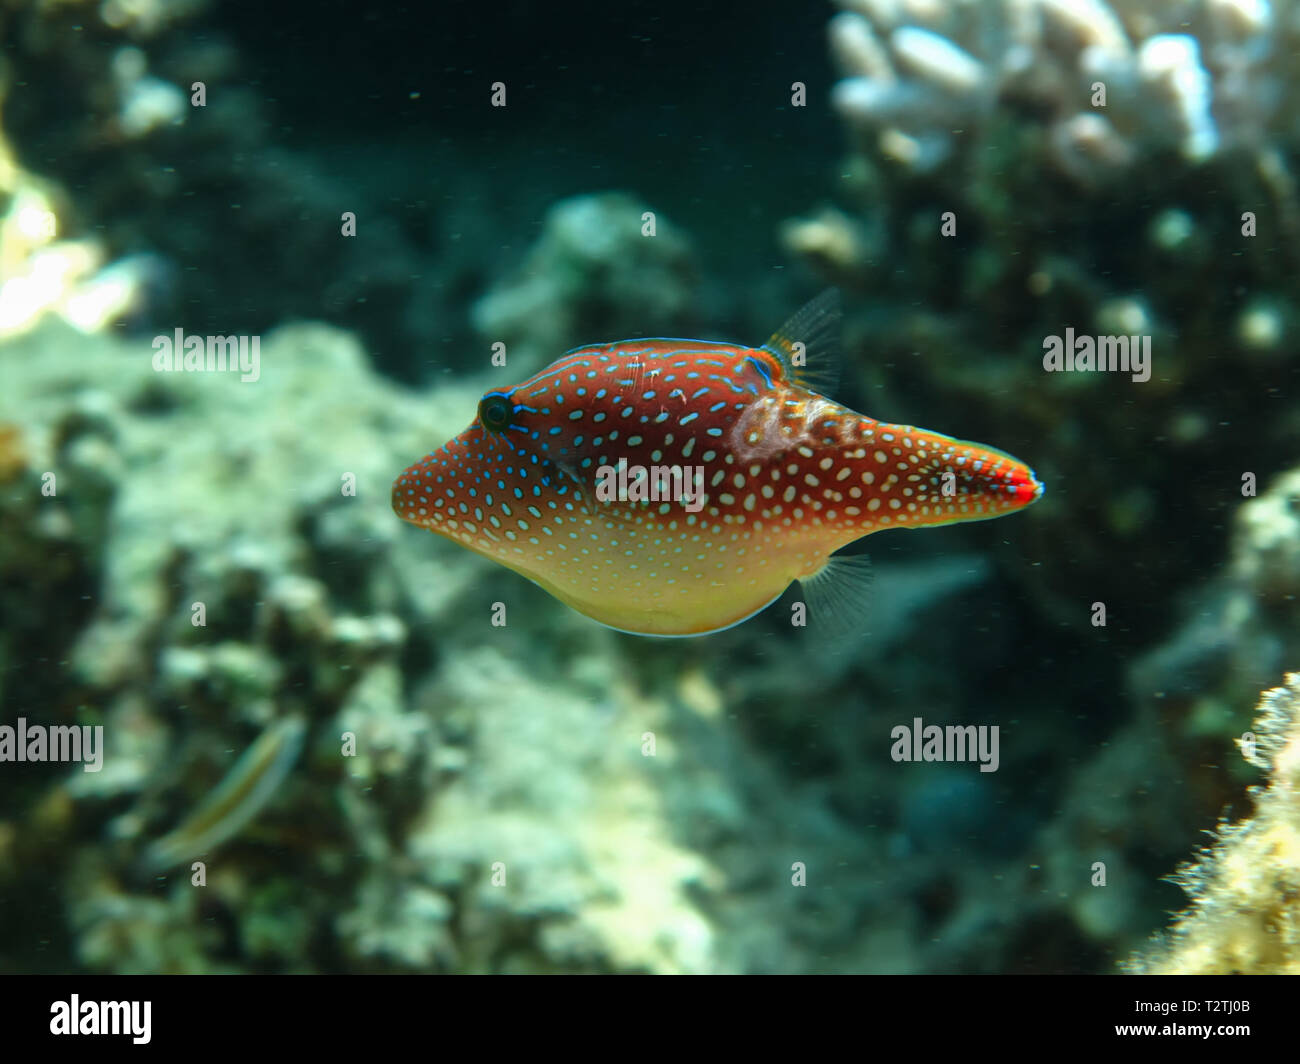 Red Sea Toby ( Canthigaster margaritata) Taken in Red Sea, Egypt. Stock Photo